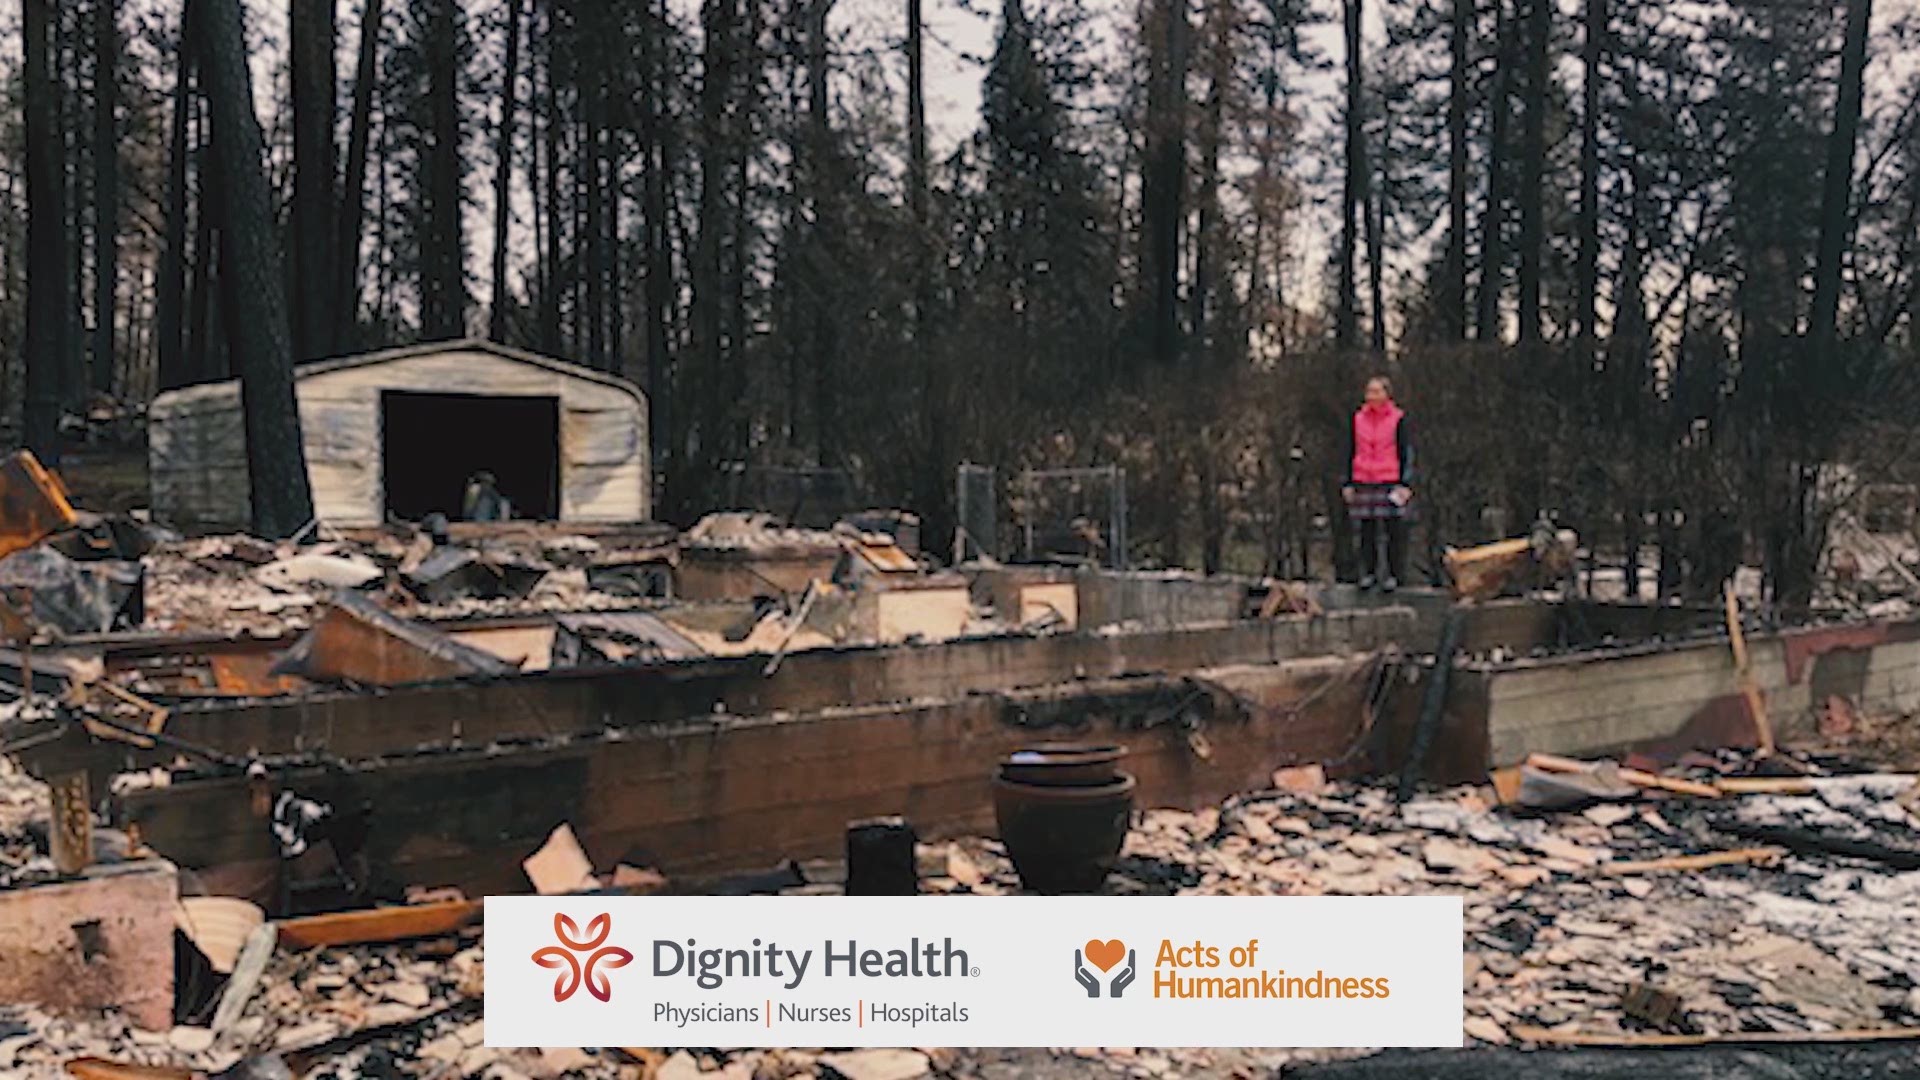 Dignity Health is recognizing Scott Paris as their Acts of Humankindness recipient. The High Hand Nursery owner took action and has helped thousands of Camp Fire victims in need.